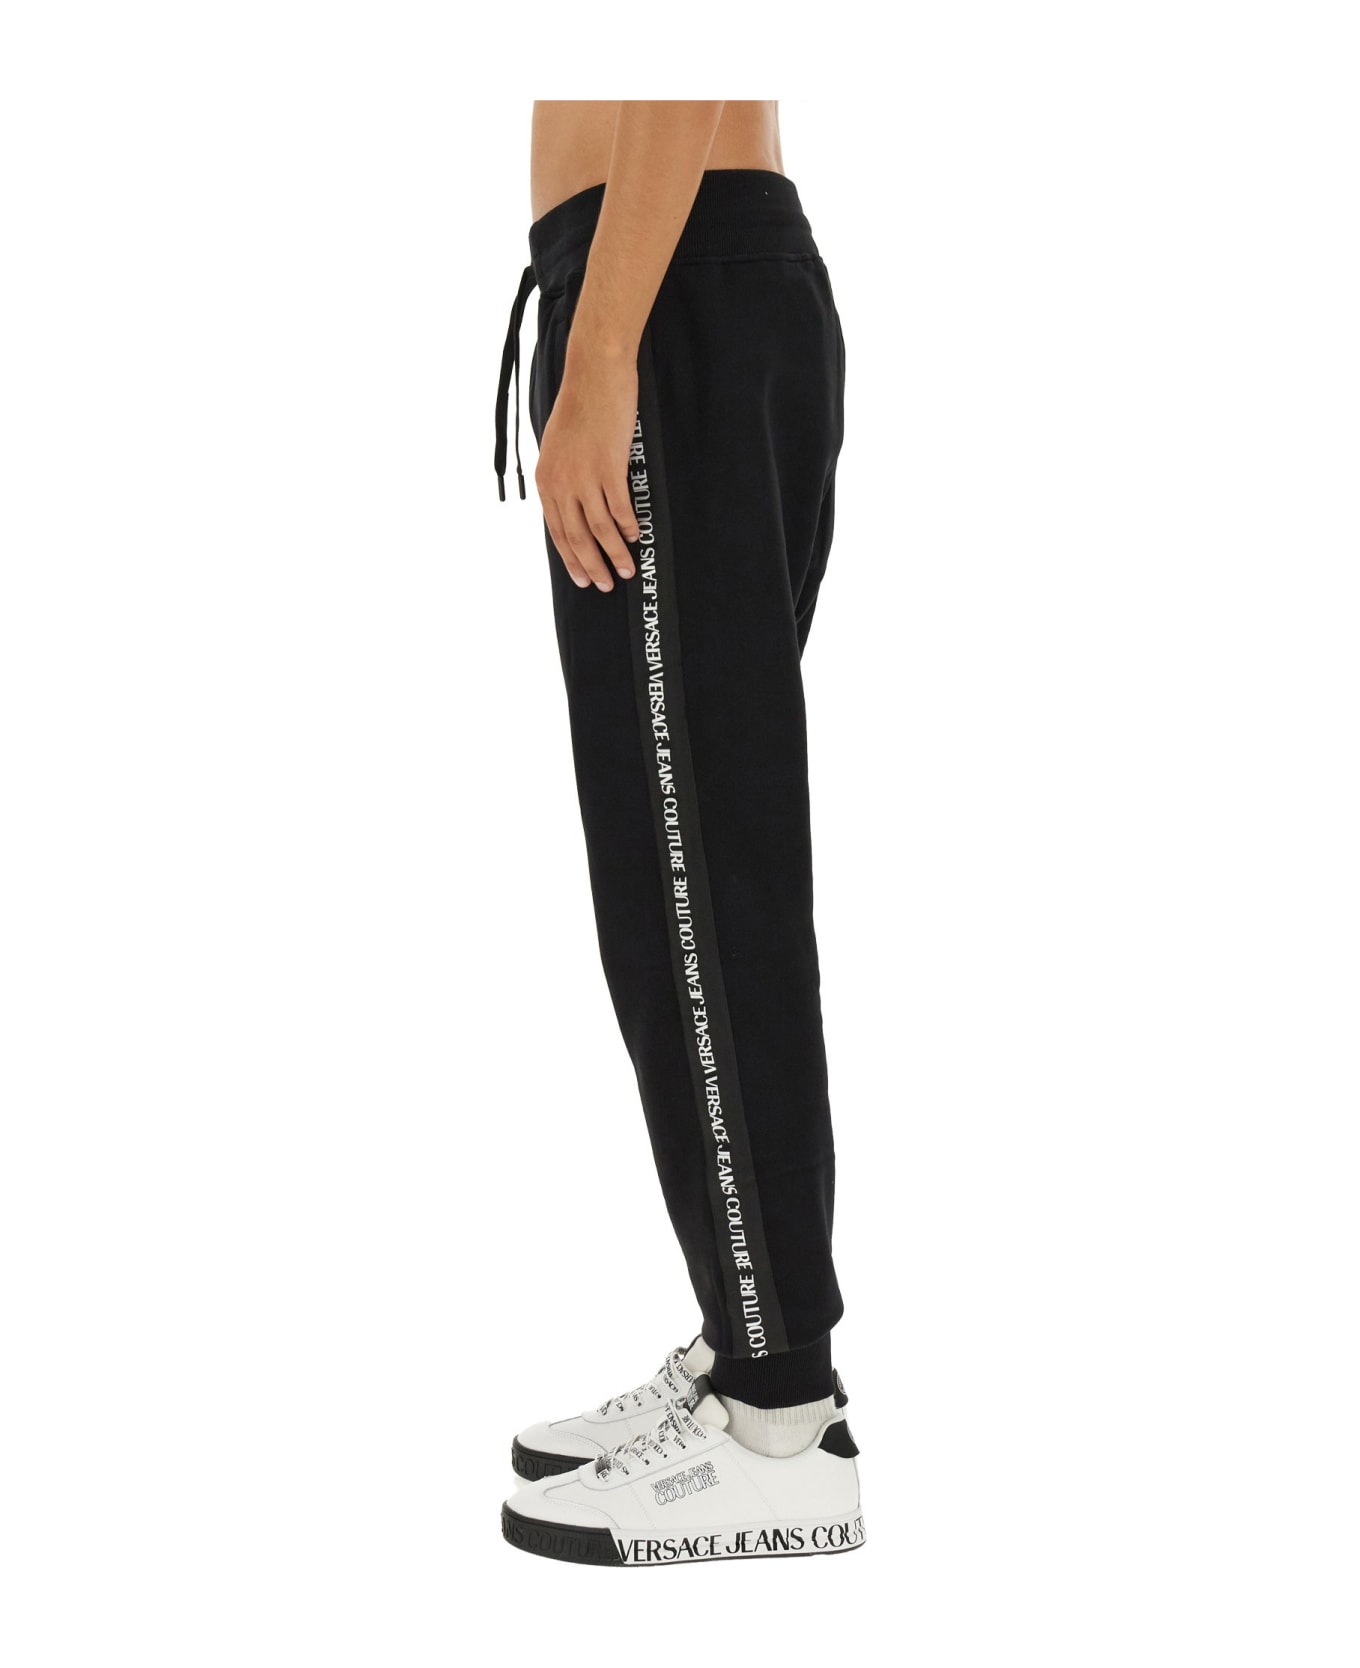 Versace Jeans Couture Sweatpants With Branded Side Stripes - NERO スウェットパンツ